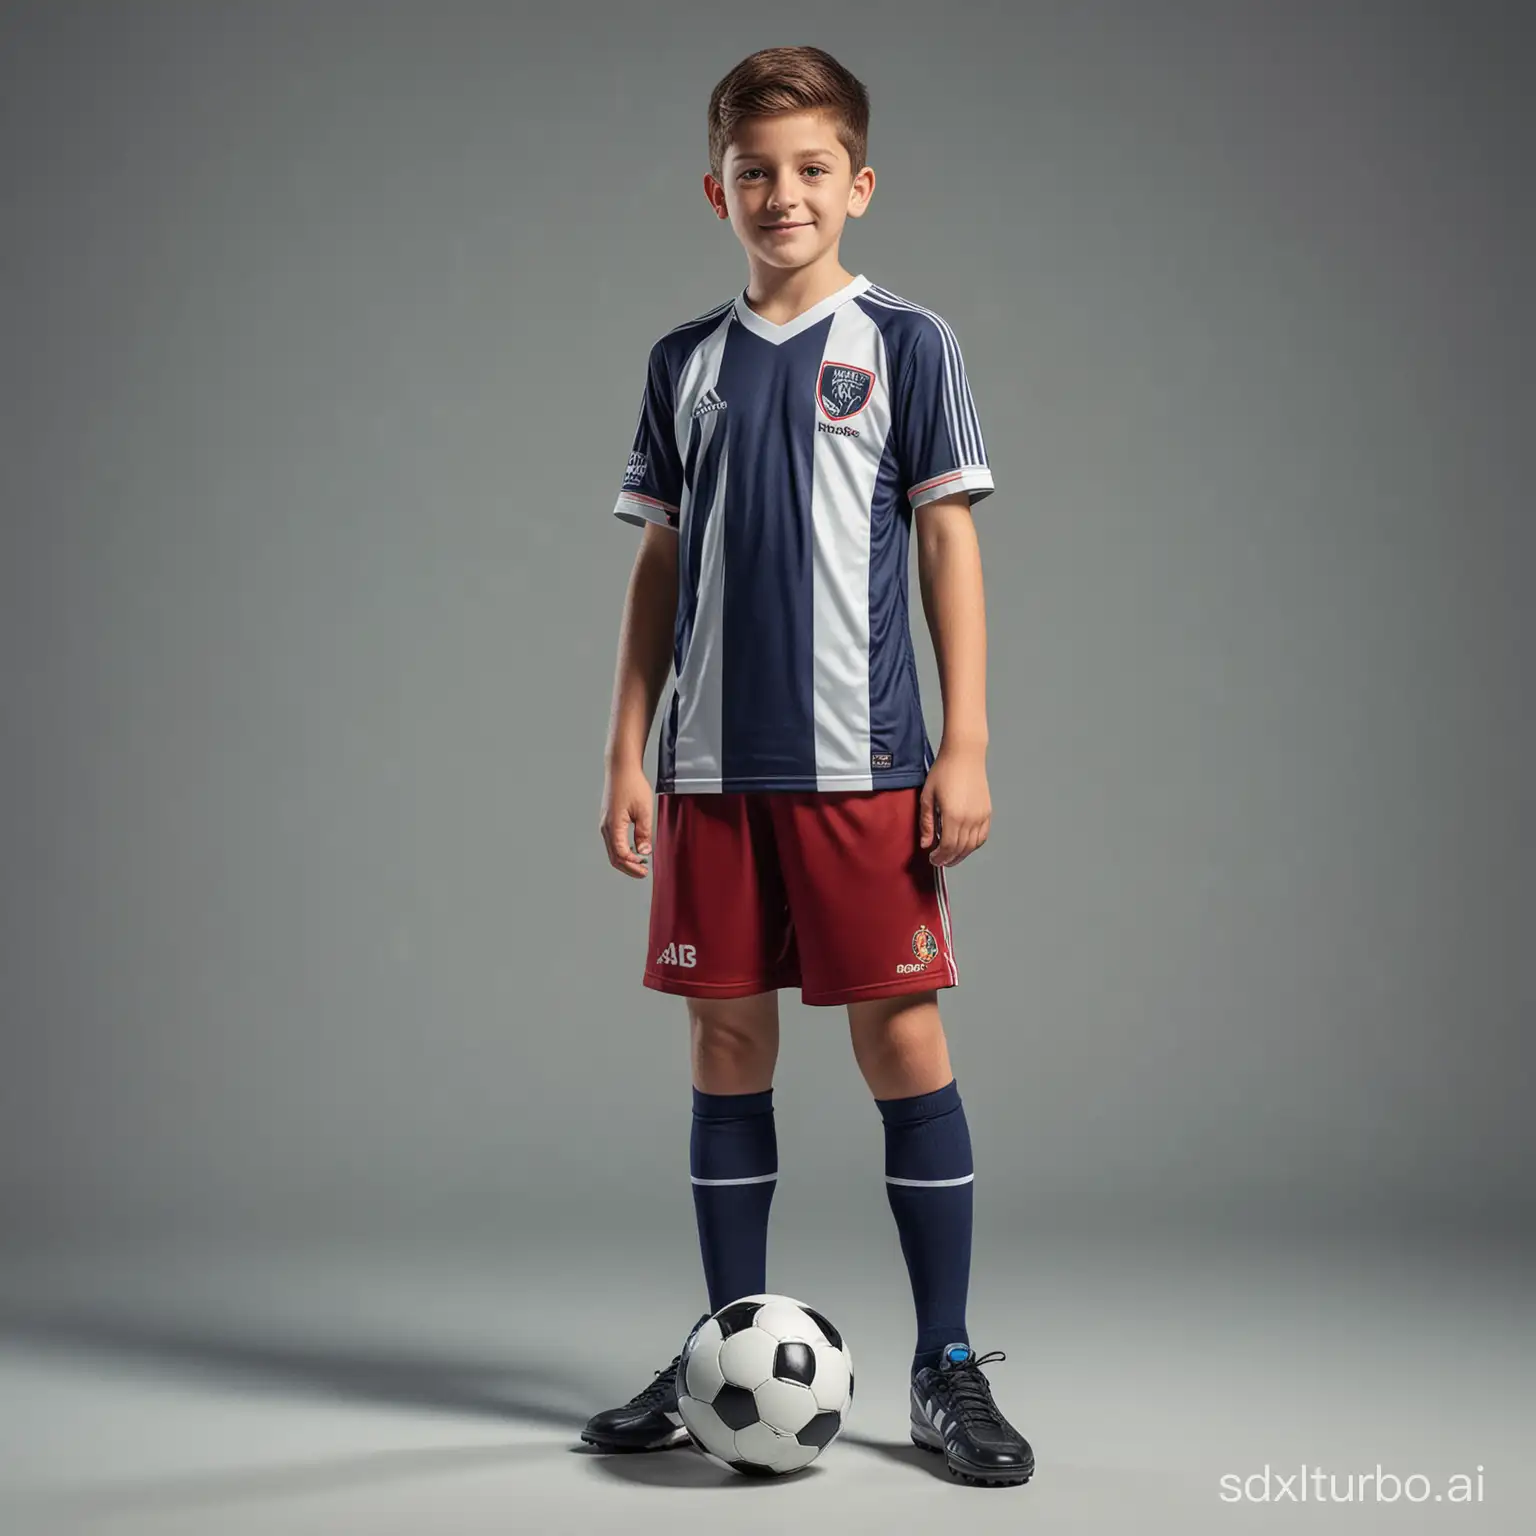 As a graphic designer expert, you can create an image of a boy wearing an 11-a-side football sports uniform in 5D that can be rotated 360 degrees.